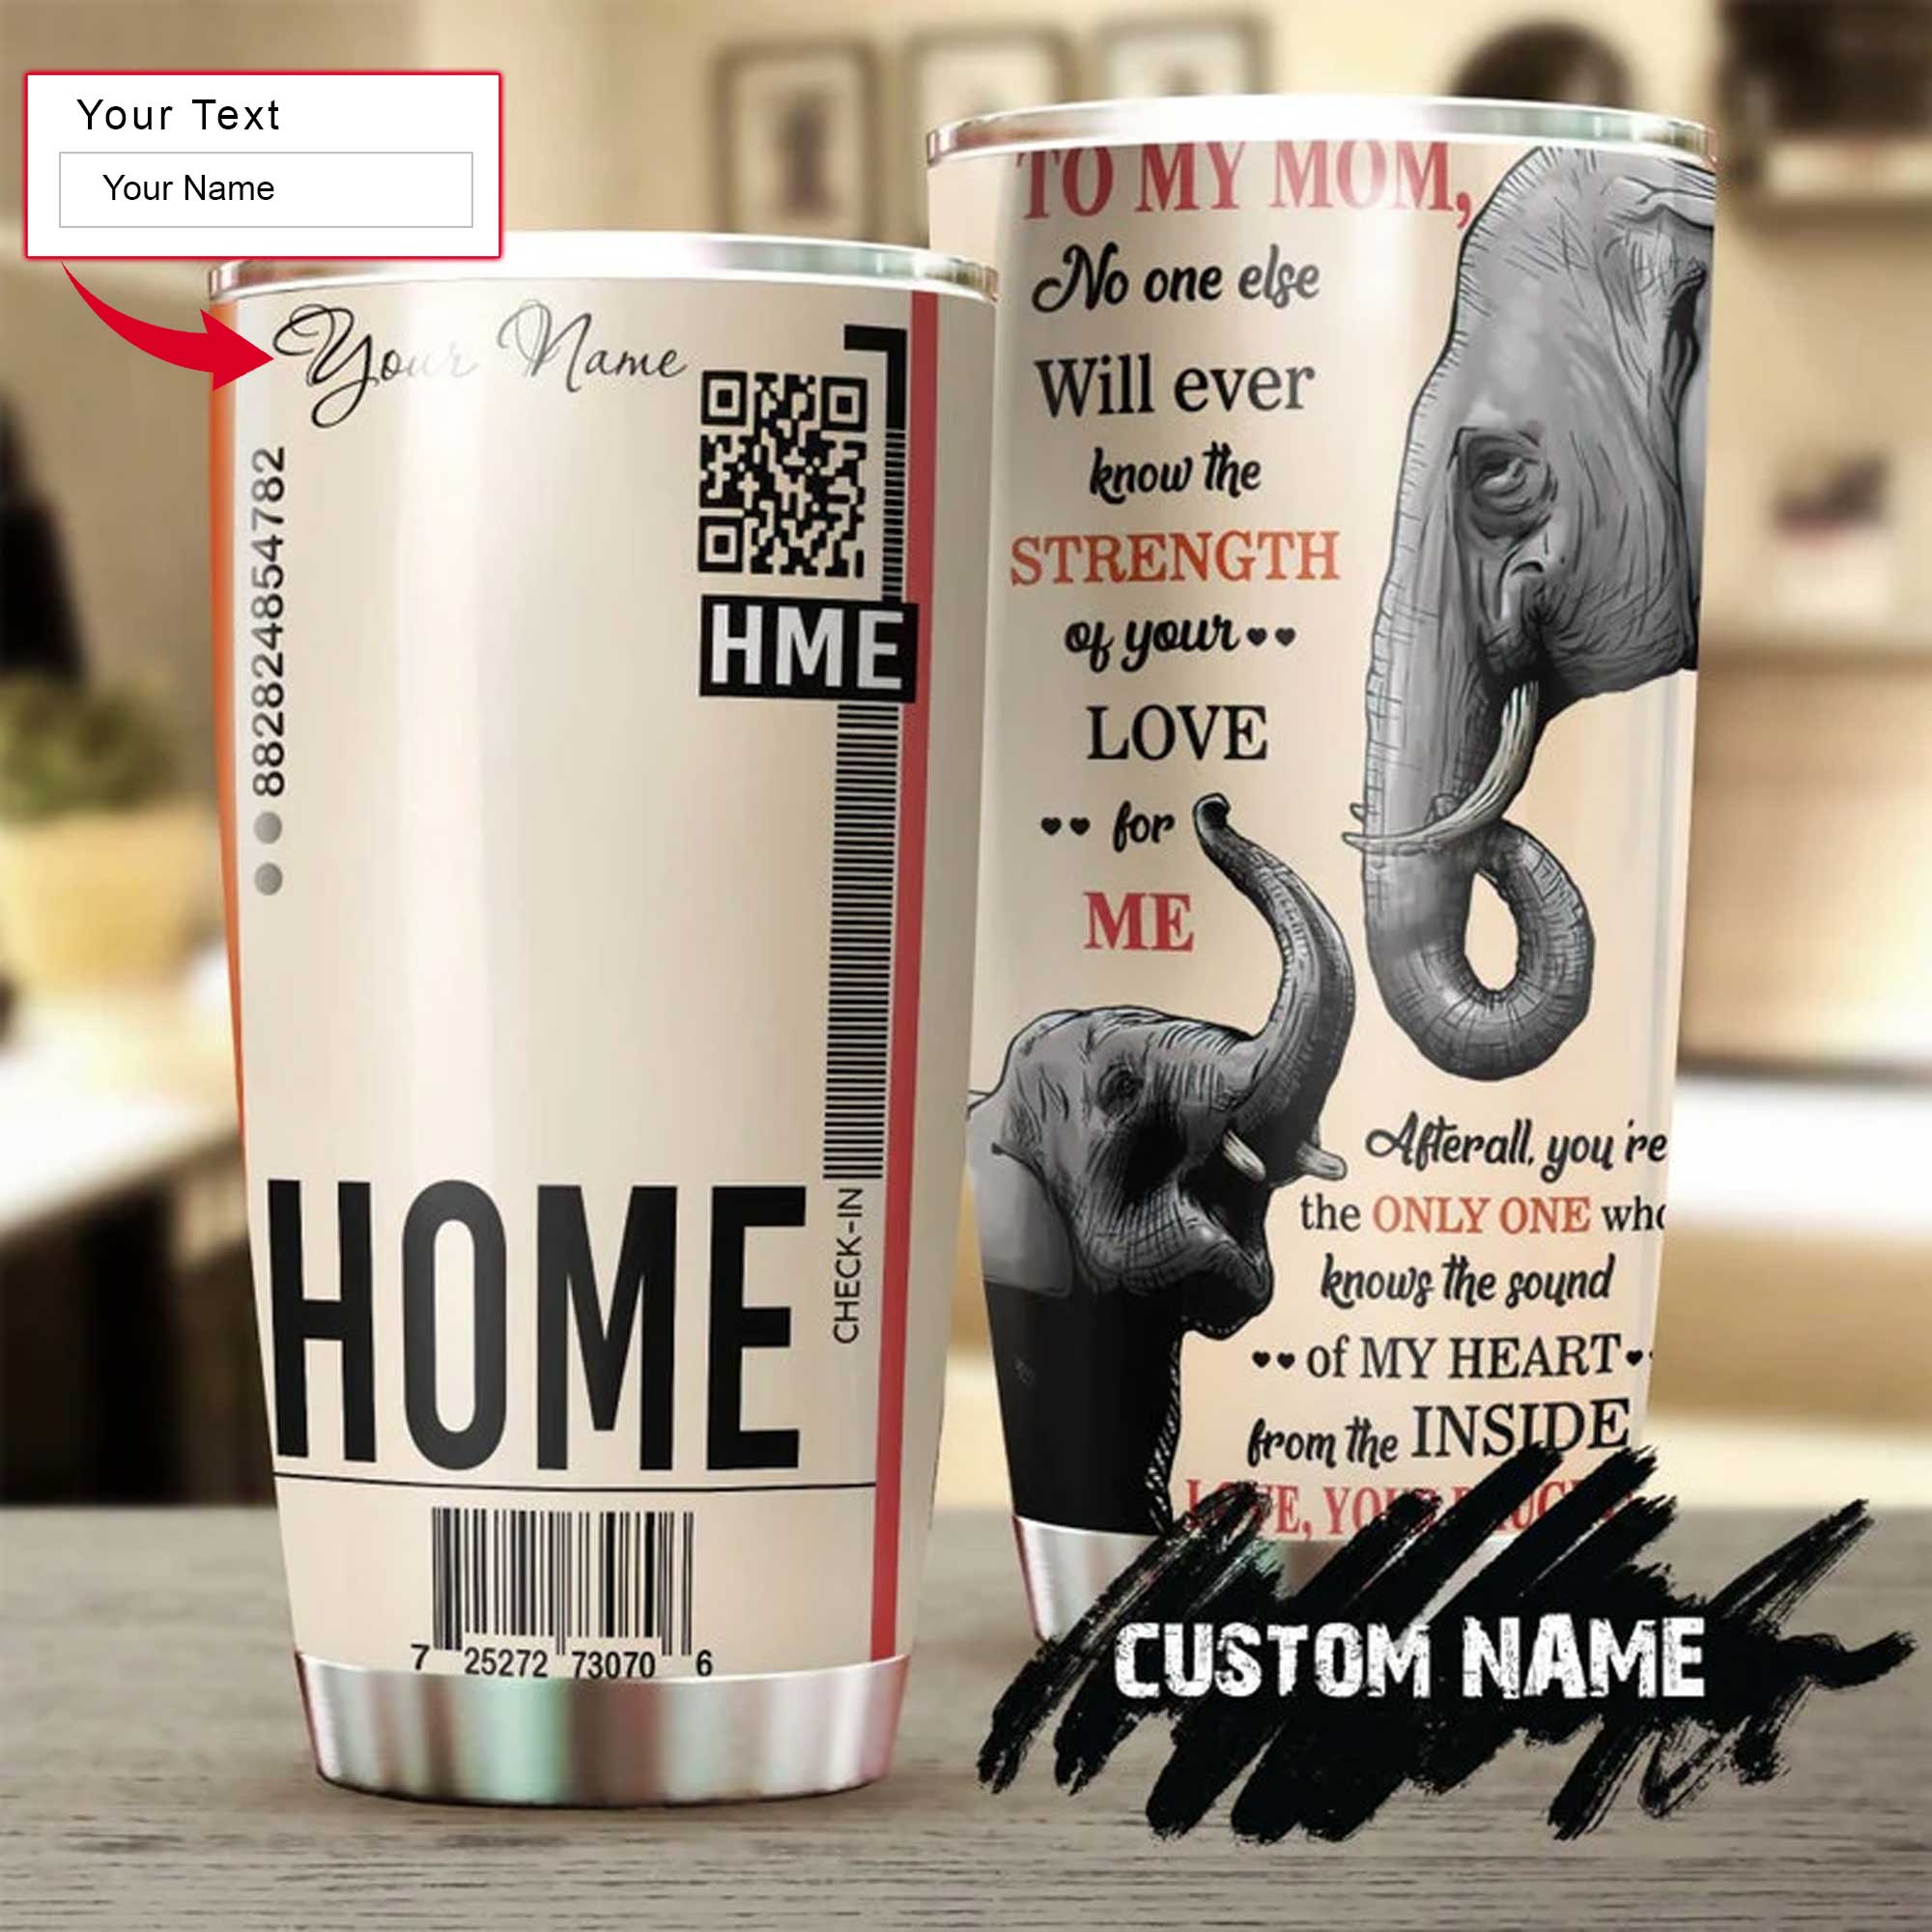 Personalized Mother's Day Gift Tumbler - Custom Gift For Mother's Day, Presents For Mom - Elephant Baby And Mom, Home, Ticket Strength Of Love Tumbler